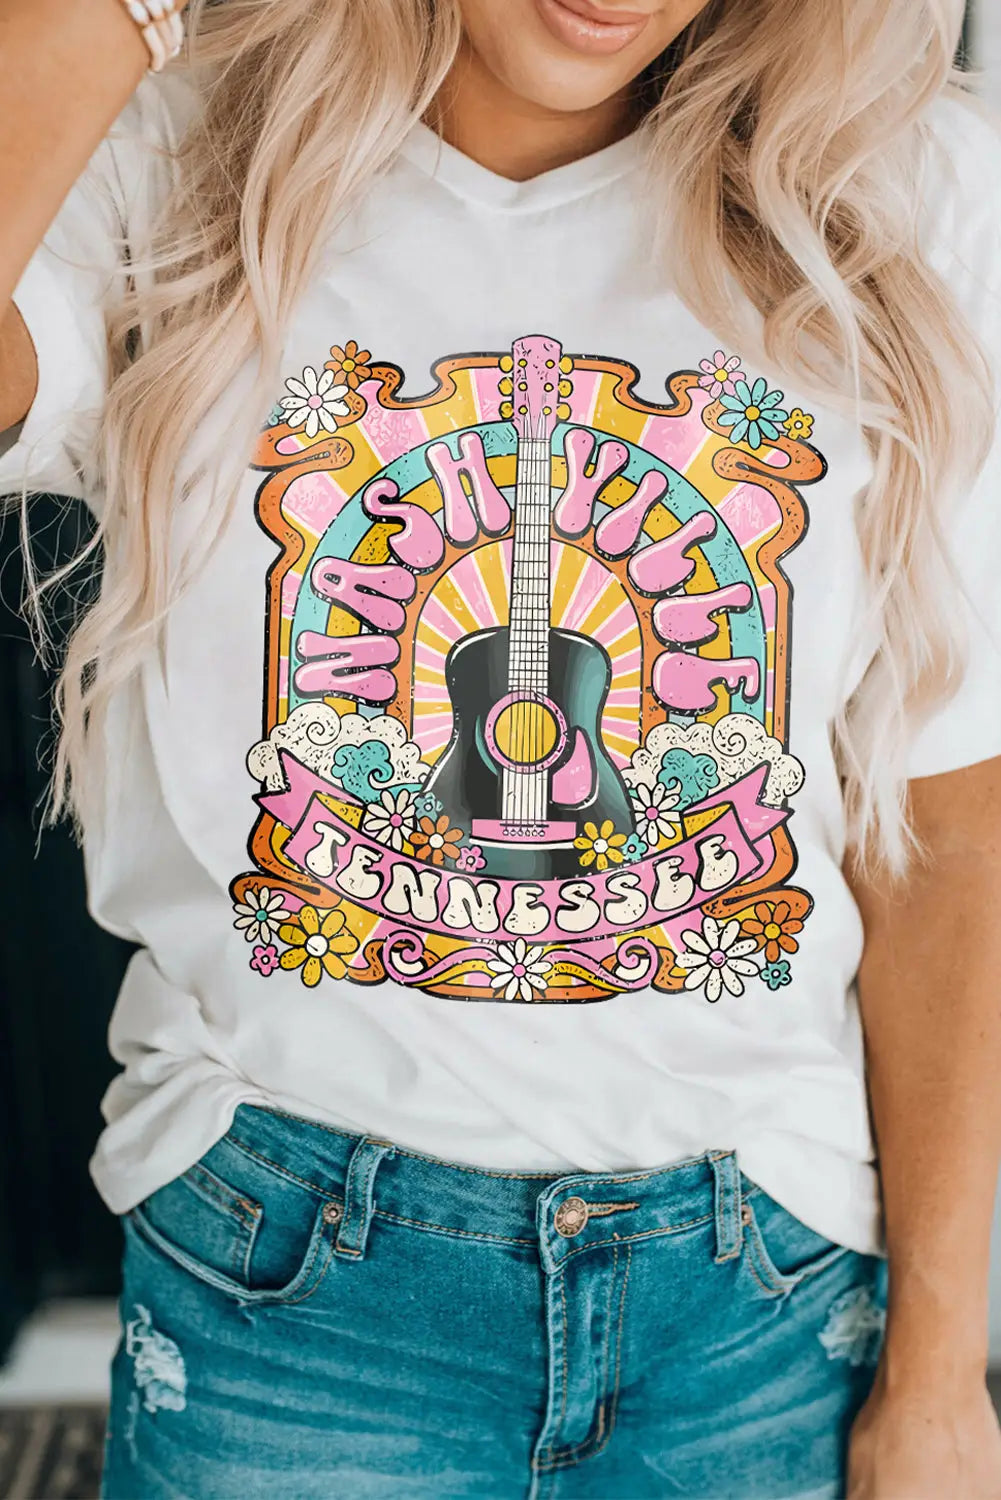 White nashiville guitar graphic country music t-shirt - s / 62% polyester + 32% cotton + 6% elastane - t-shirts